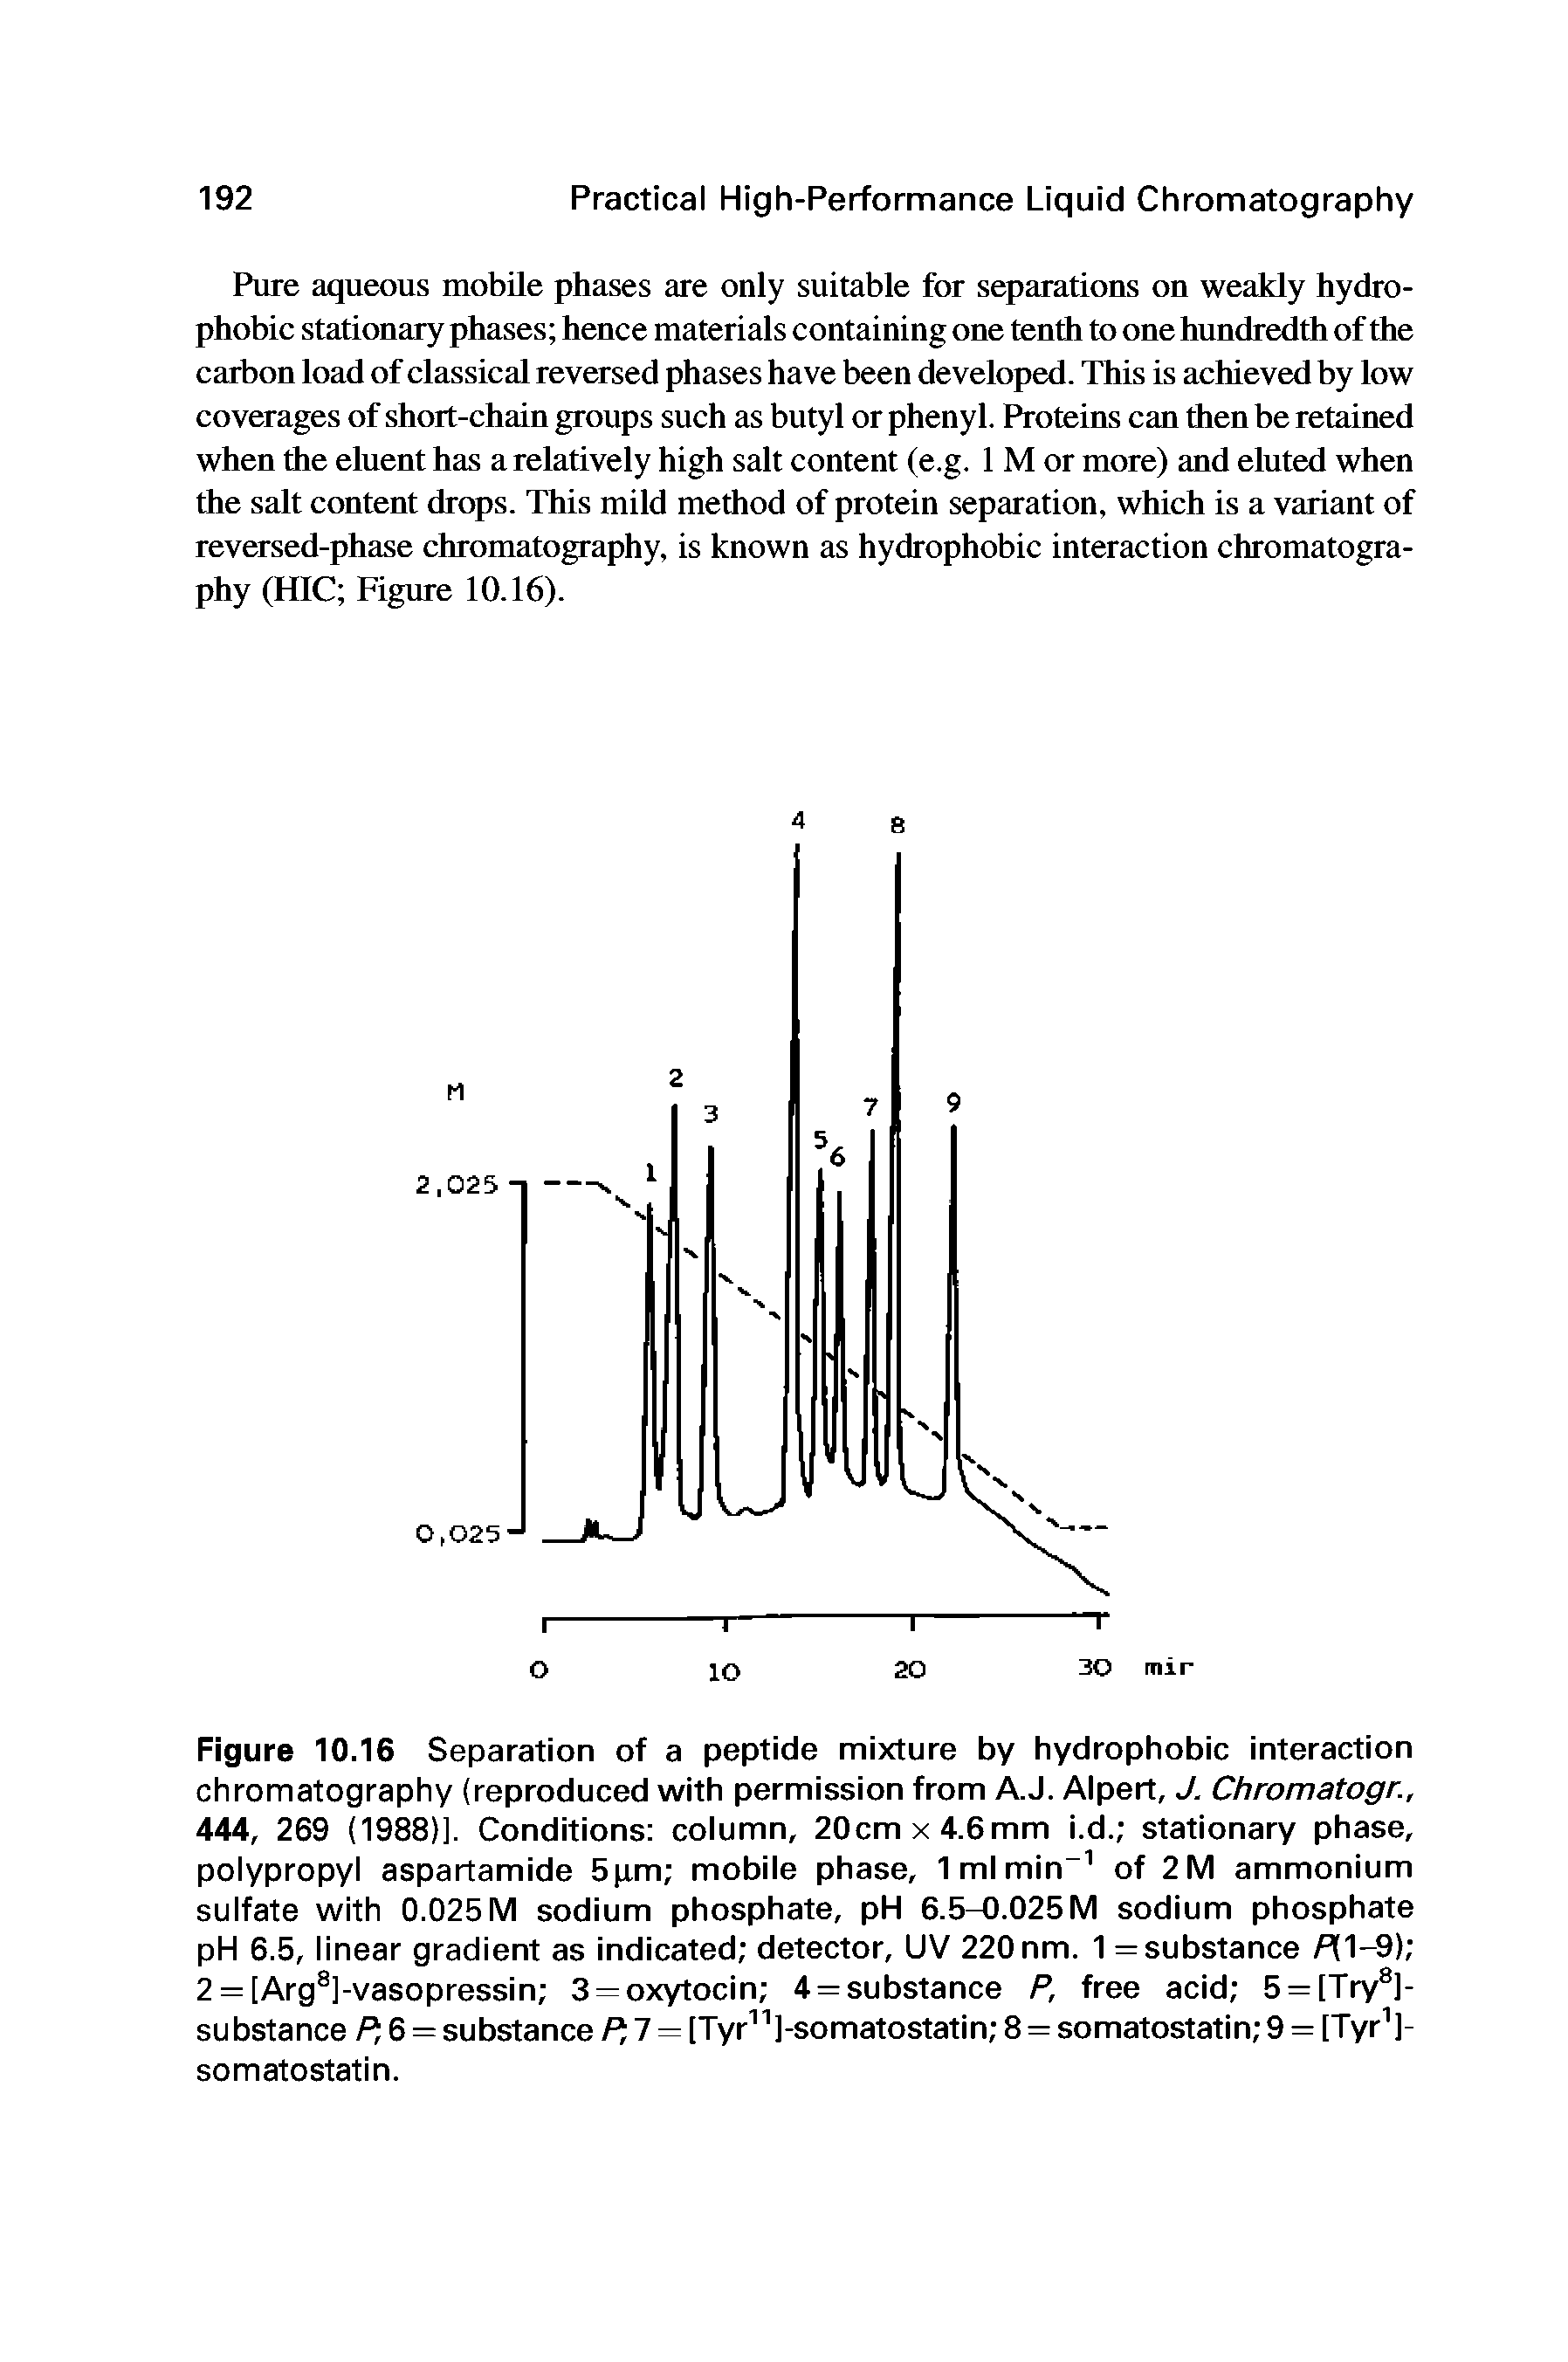 Figure 10.16 Separation of a peptide mixture by hydrophobic interaction chromatography (reproduced with permission from A.J. Alpert, J. Chromatogr., 444, 269 (1988)]. Conditions column, 20cm x 4.6mm i.d. stationary phase, polypropyl aspartamide 5pm mobile phase, 1mlmin of 2M ammonium sulfate with 0.025M sodium phosphate, pH 6.5-0.025M sodium phosphate pH 6.5, linear gradient as indicated detector, UV 220 nm. 1 = substance Ml—9) 2 = [Arg ]-vasopressin 3 = oxytocin 4 = substance P, free acid 5 —[Try ]-substance P, 6 = substance P,1 [Tyr ]-somatostatin 8 = somatostatin 9 = [Tyr ]-somatostatin.